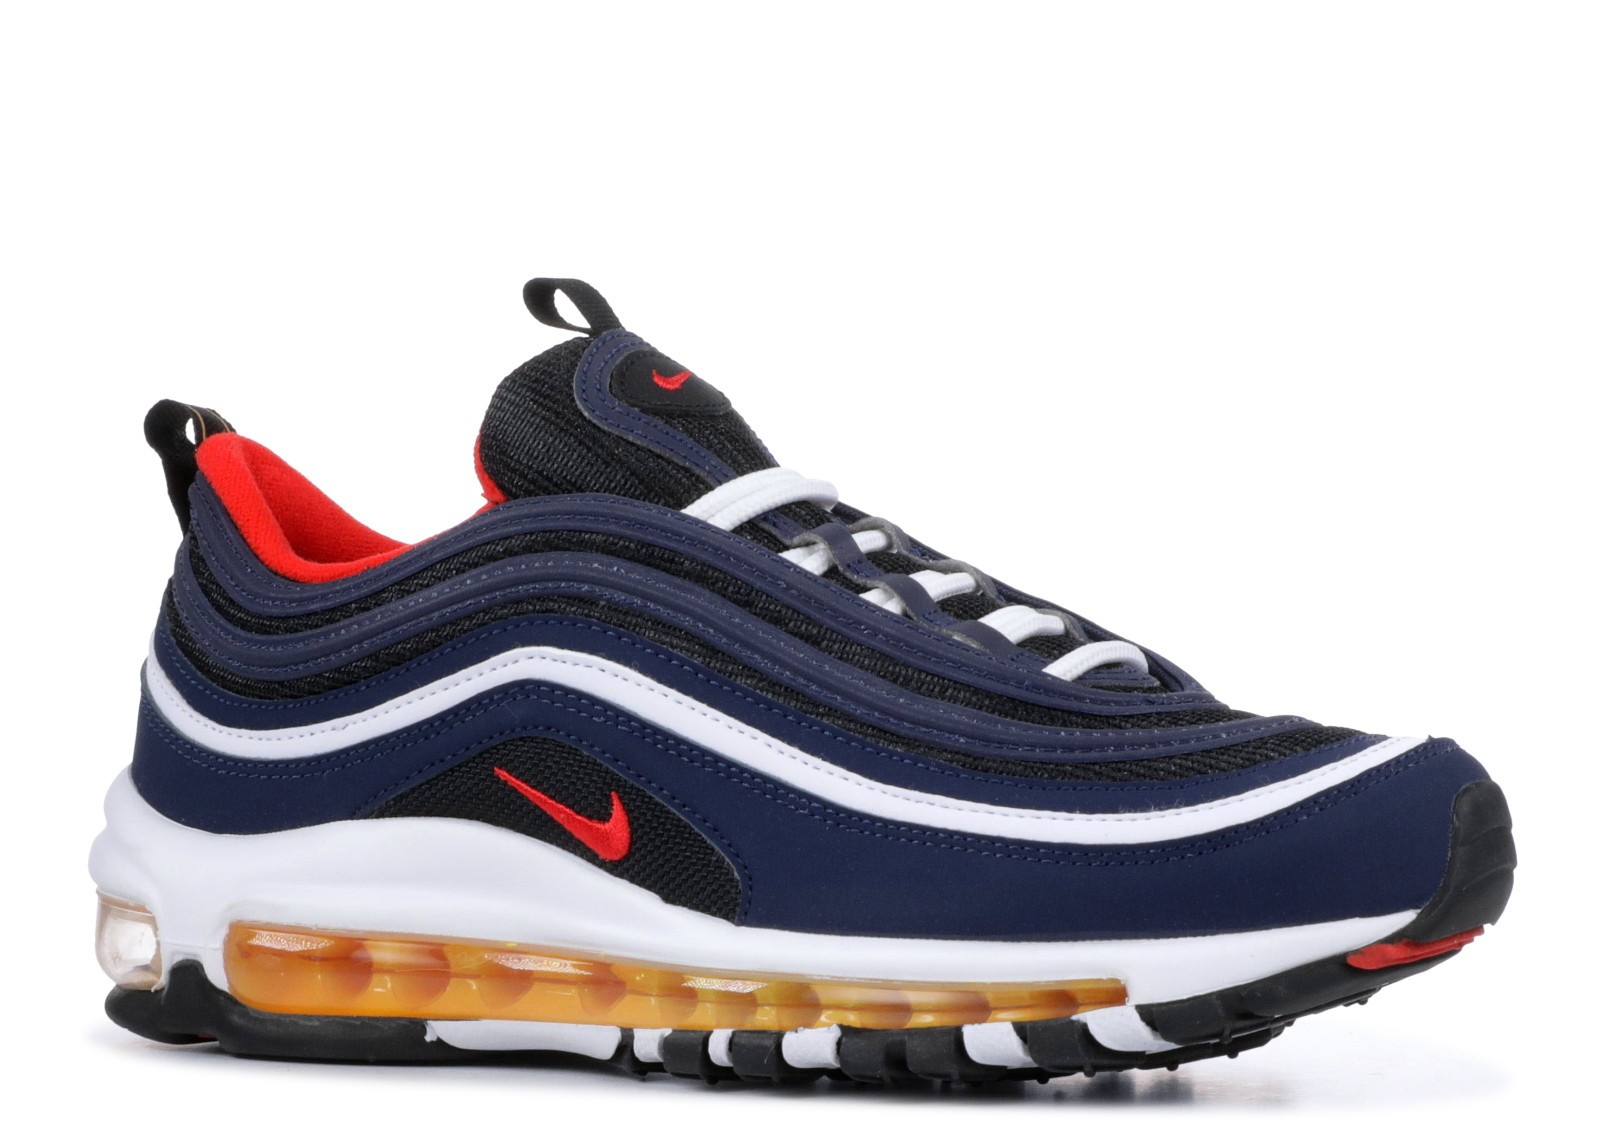 Nike Air Max 97 Midnight Navy Habanero Red 921522 - Drop-Type-sko mænd White 402 - MultiscaleconsultingShops